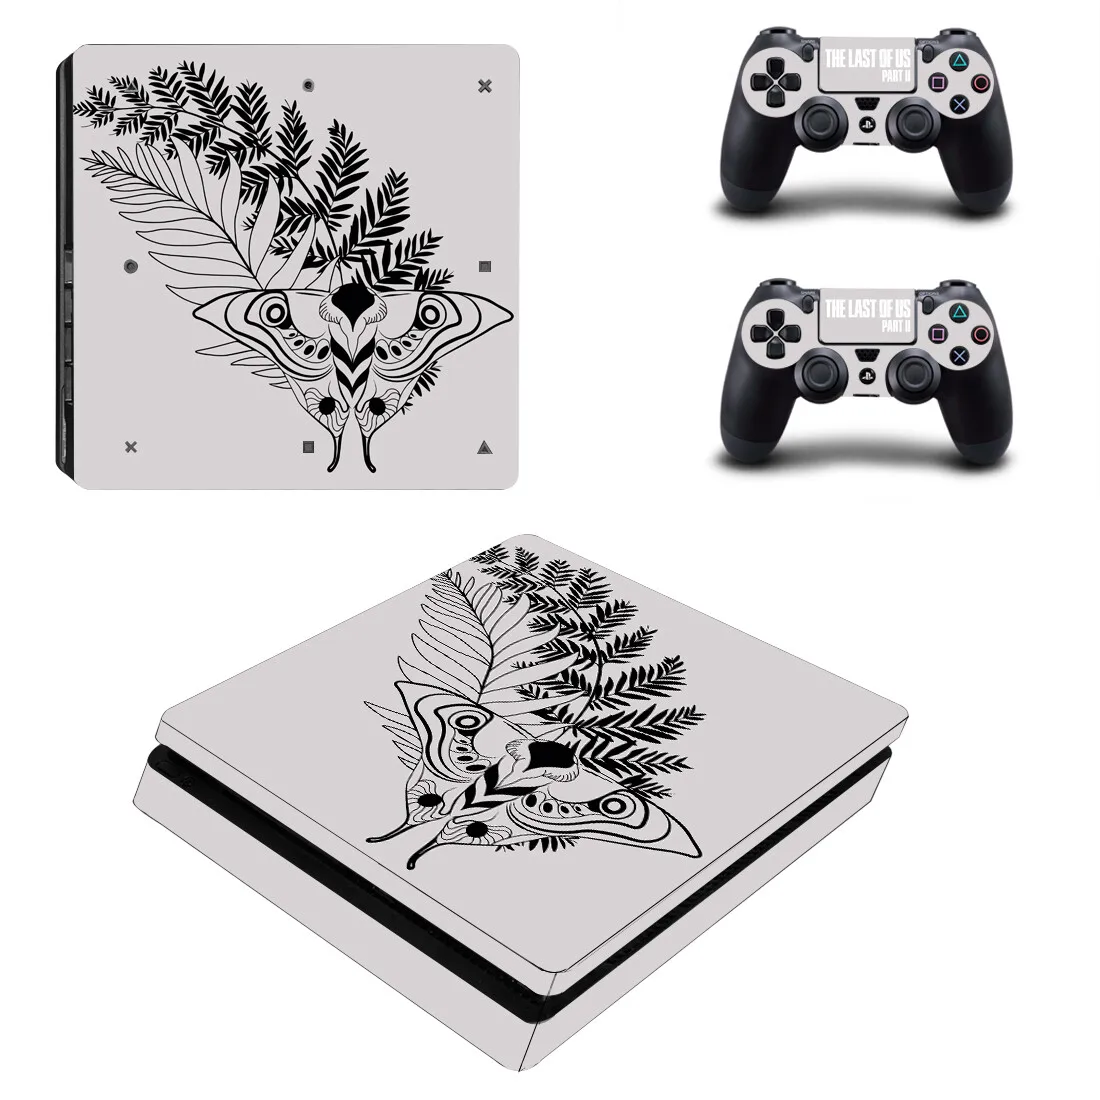 

The Last of Us Ellie Joel PS4 Slim Skin Sticker Decal Cover Protector For Console and Controller Skins Vinyl